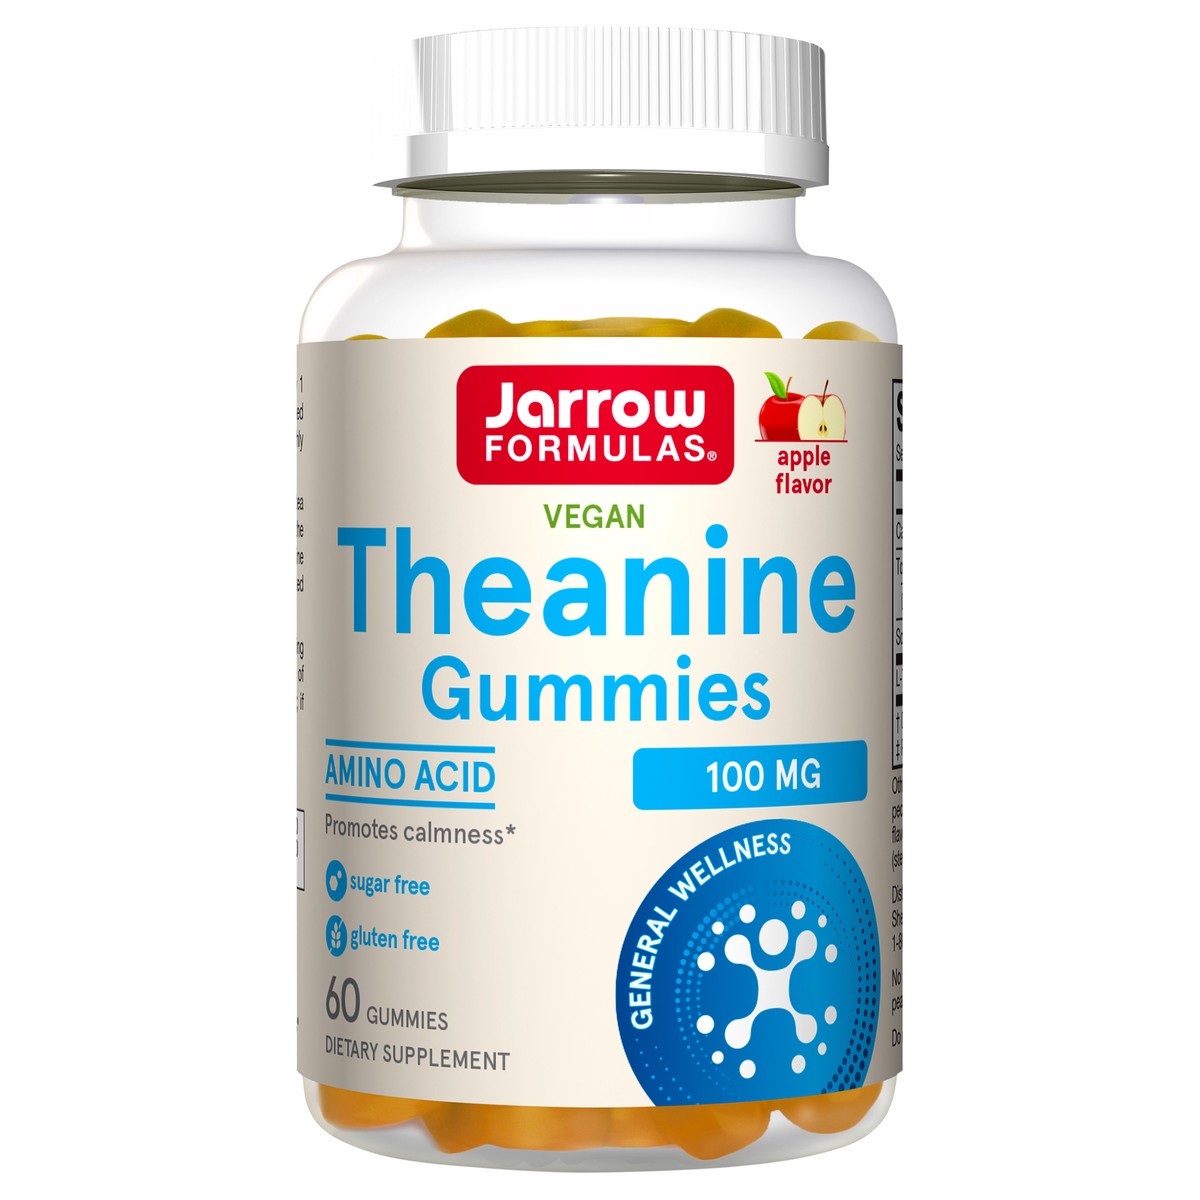 slide 5 of 5, Jarrow Formulas Theanine Gummies 100 mg - 60 Apple Gummies - Neurologically Active Amino Acid - Found in Green Tea - Promotes Relaxation & Calmness - Sugar Free - 60 Servings (PACKAGING MAY VARY), 60 ct